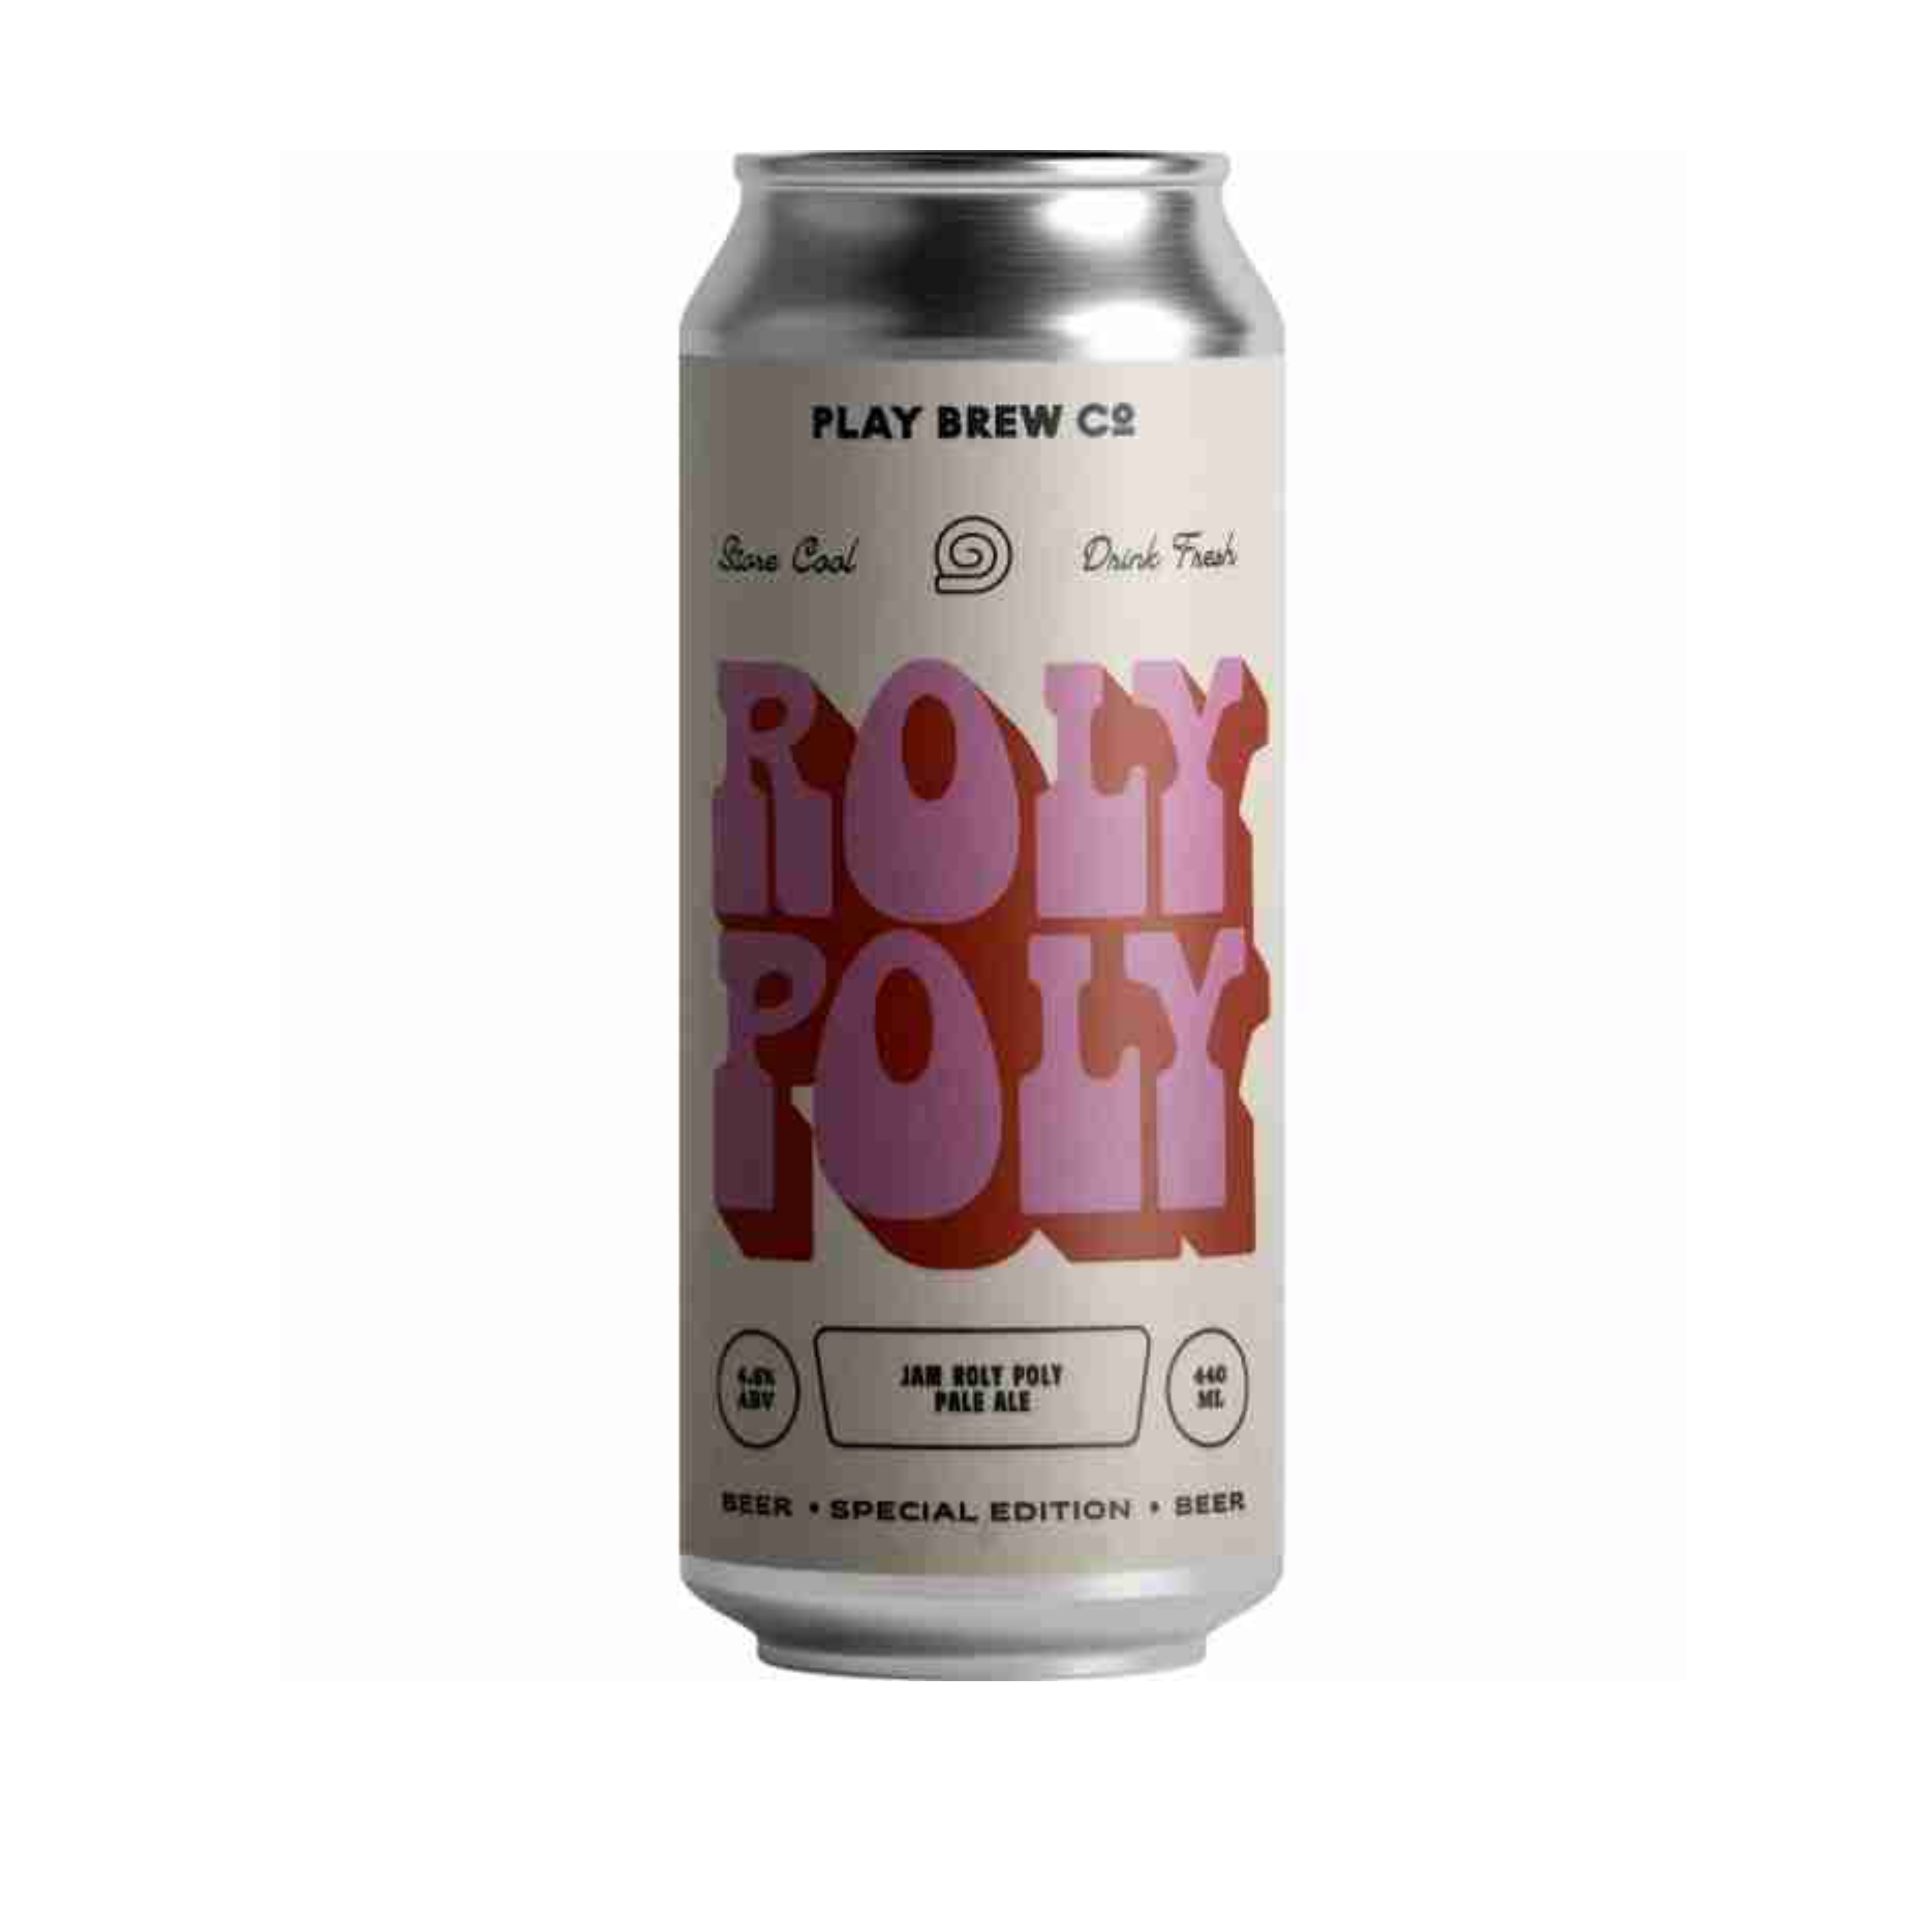 Play Brew Roly Poly